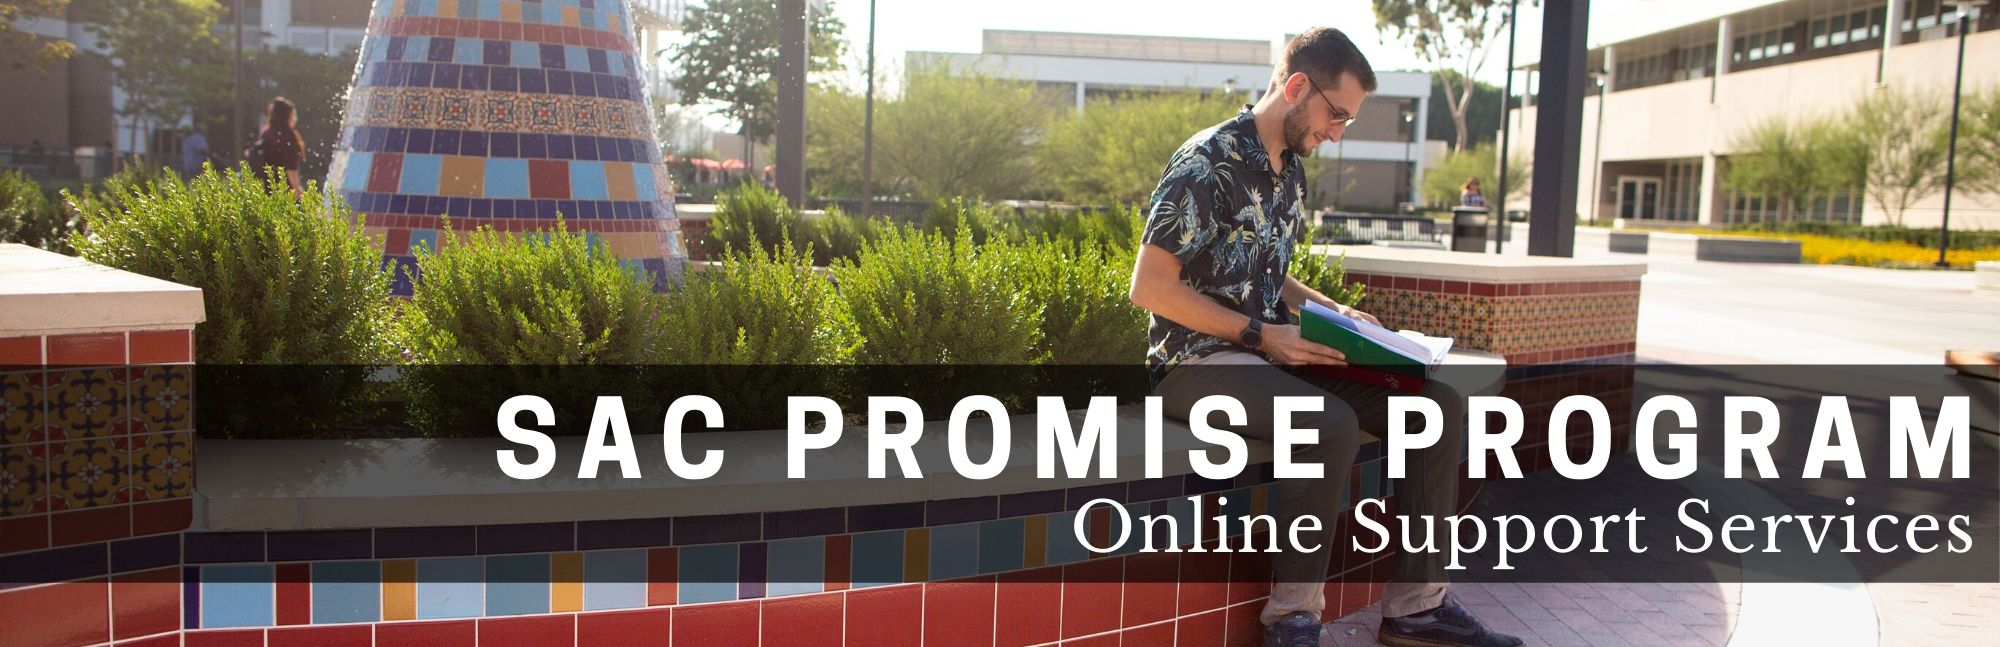 SAC Promise Program Online Support Services